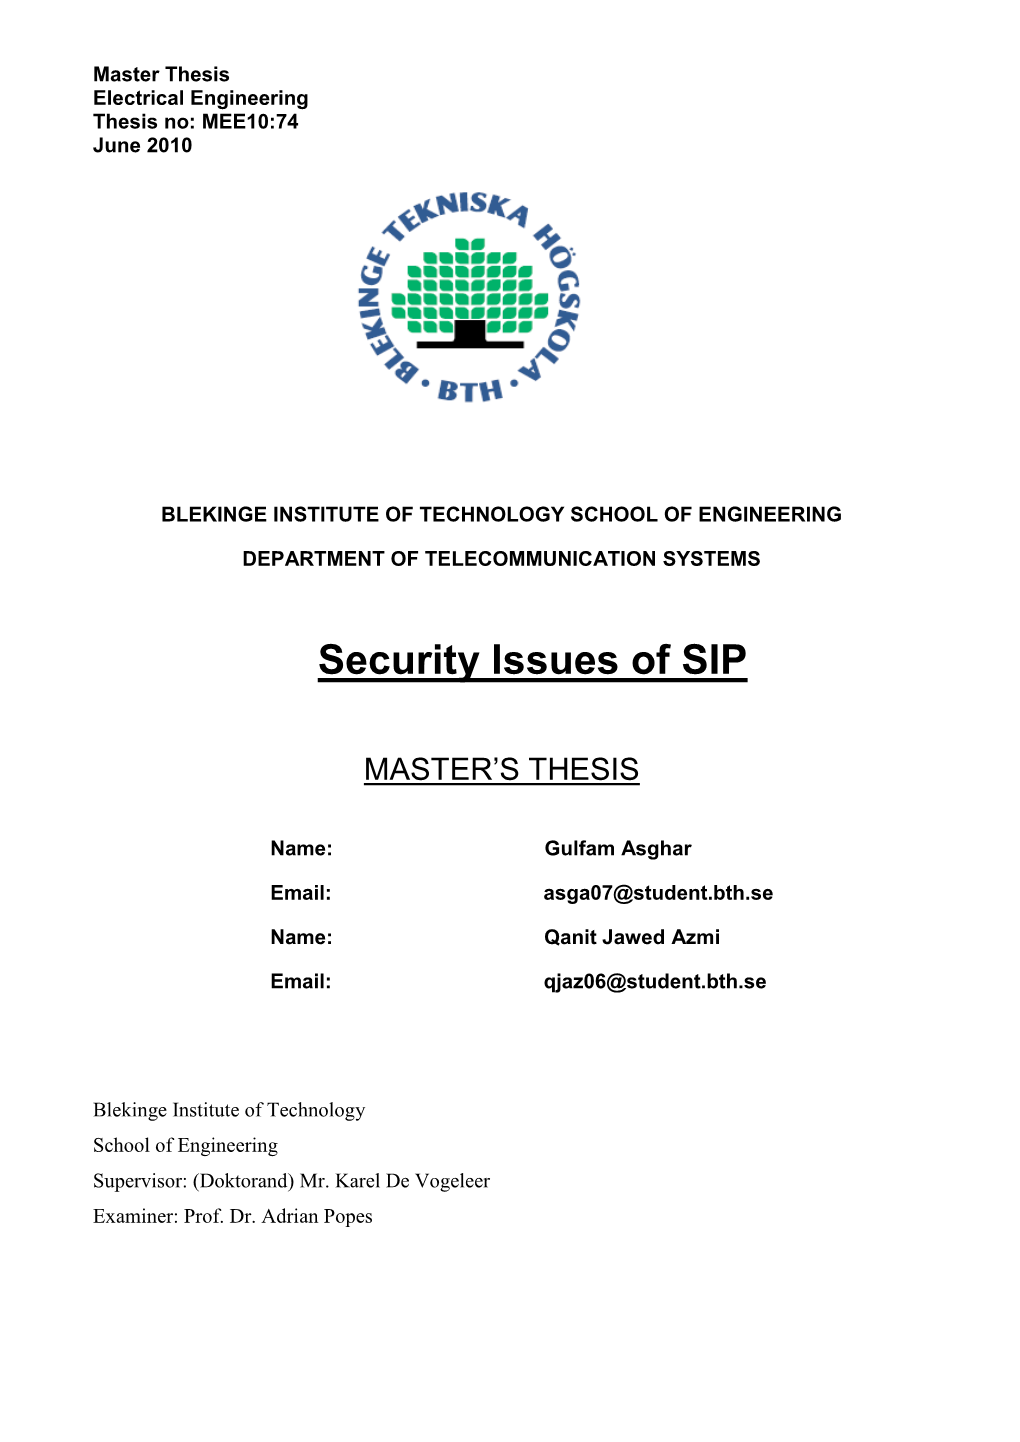 Security Issues of SIP